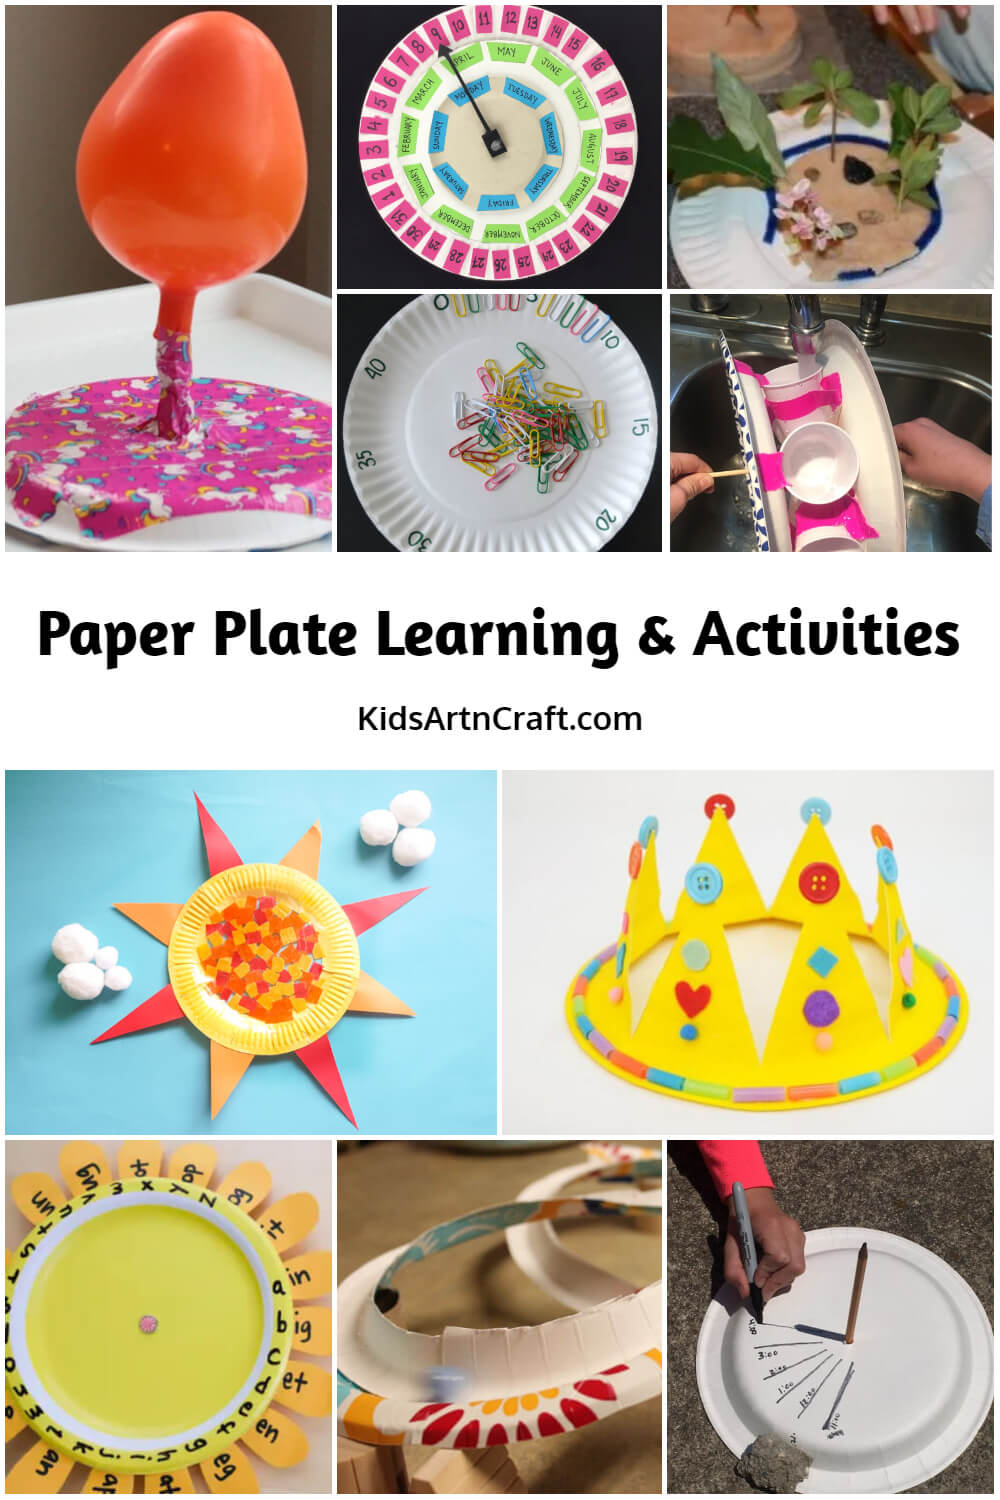 Paper Plate Learning Activities & Projects